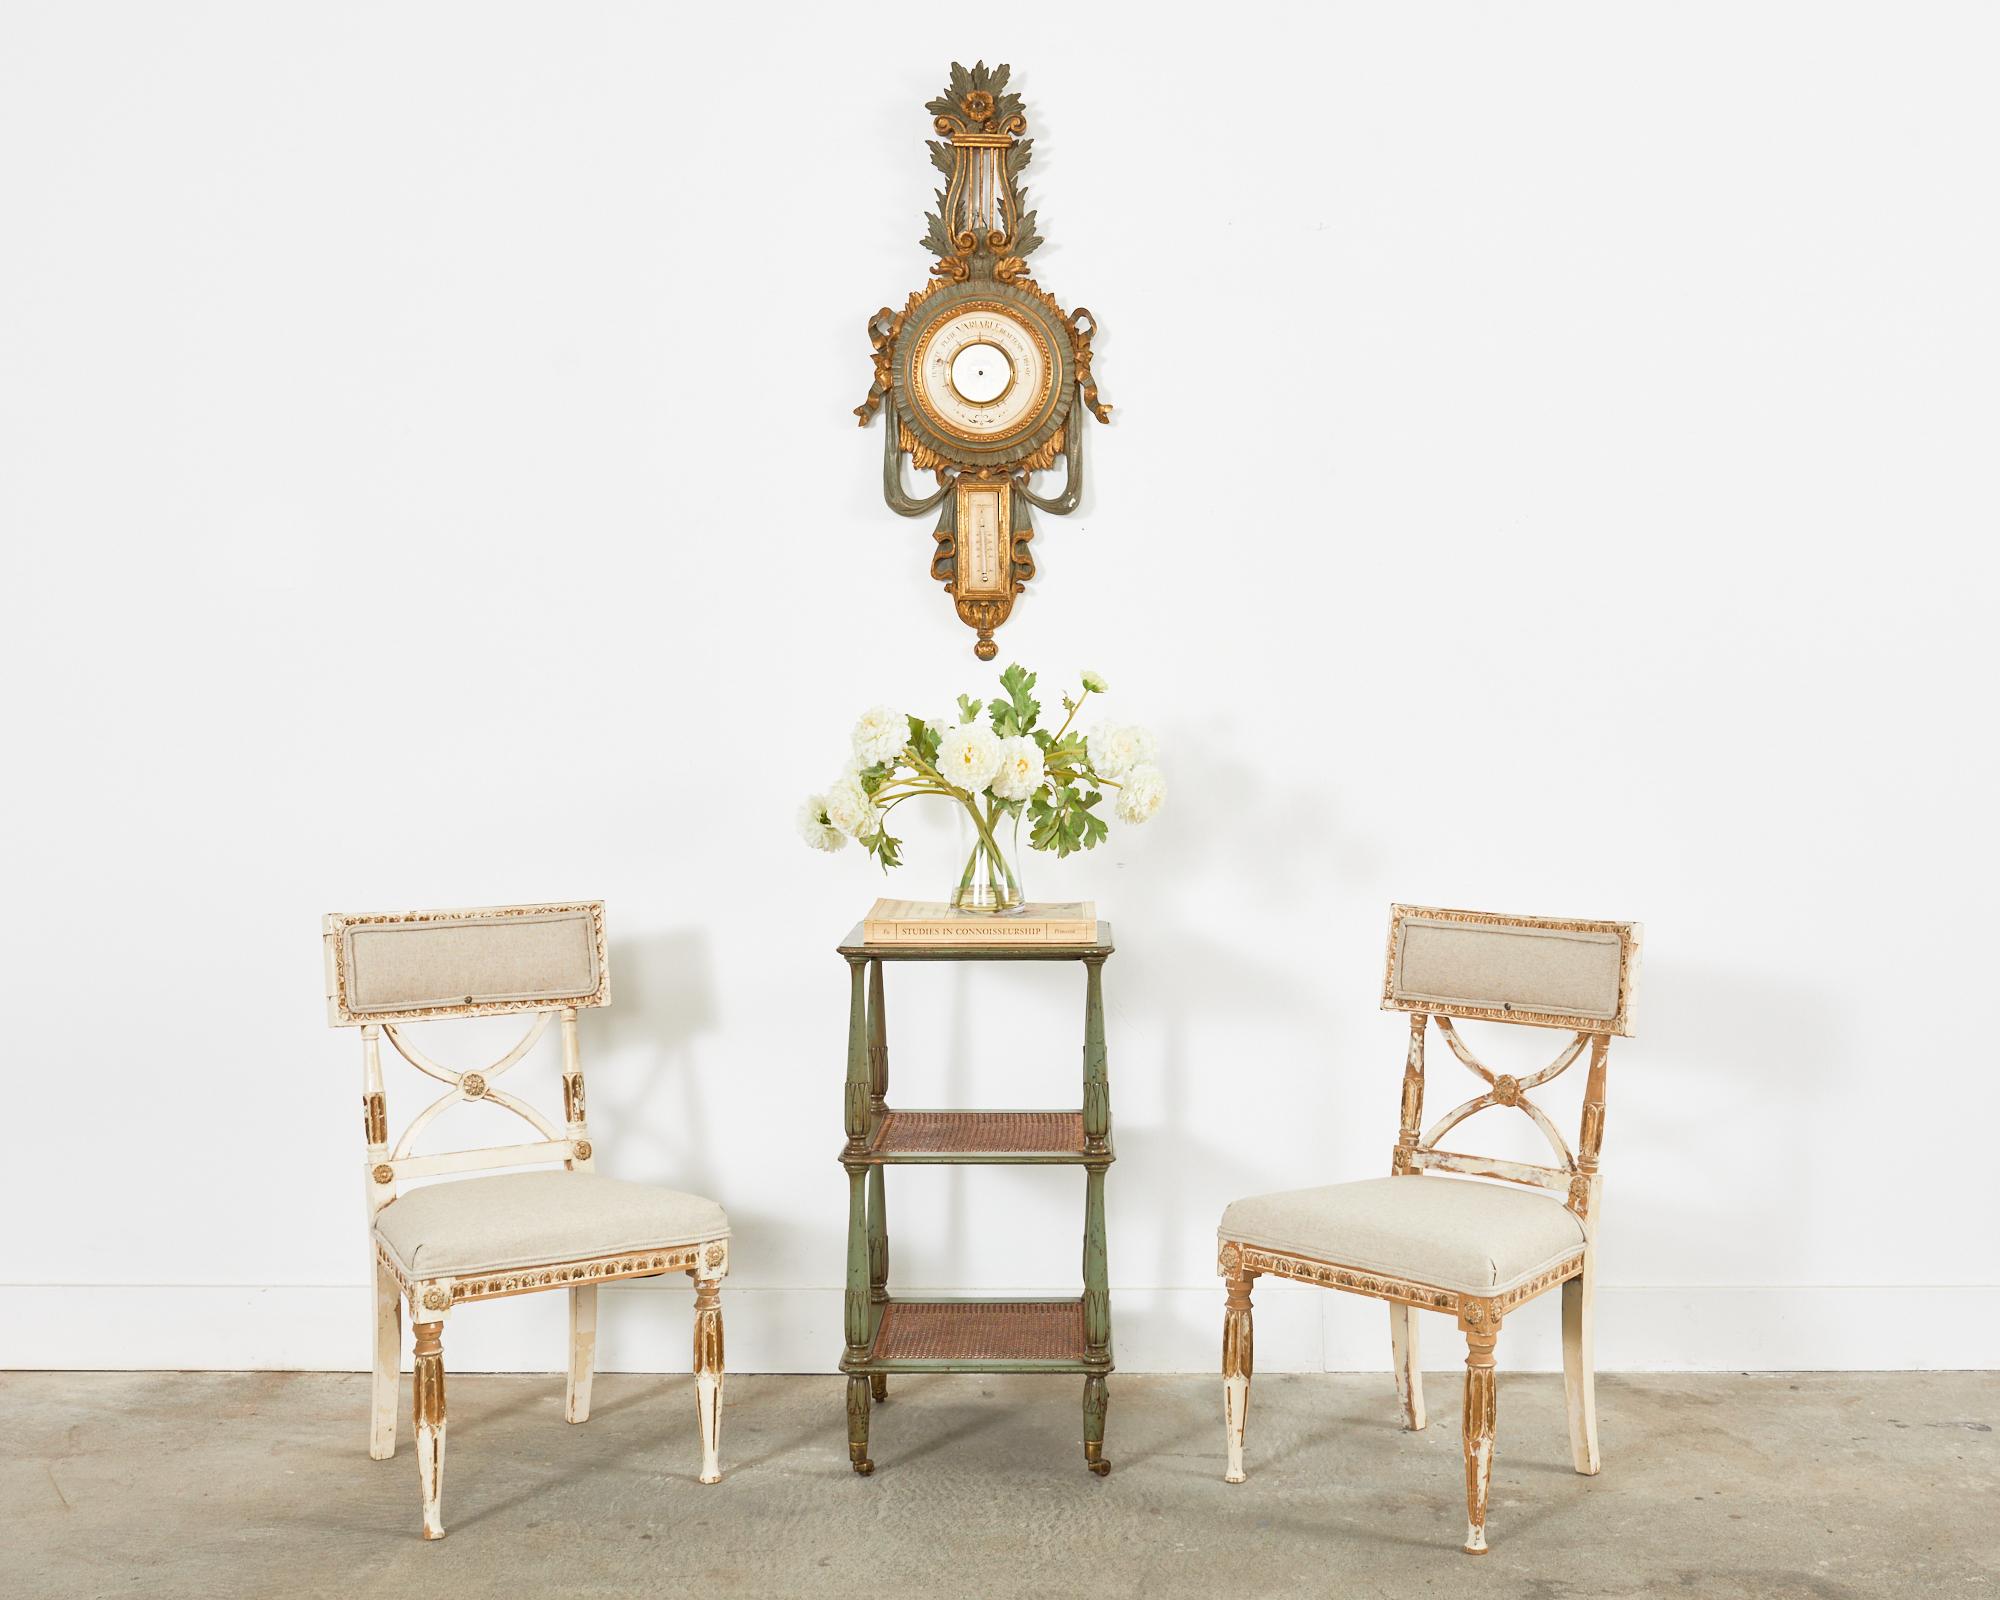 Gorgeous pair of 19th-century Swedish drink tables made in the neoclassical gustavian taste. The lacquered three-tier tables feature a marble tile stone inset top and two hand-caned shelves. The shelves are supported by tulip bud vase shaped legs